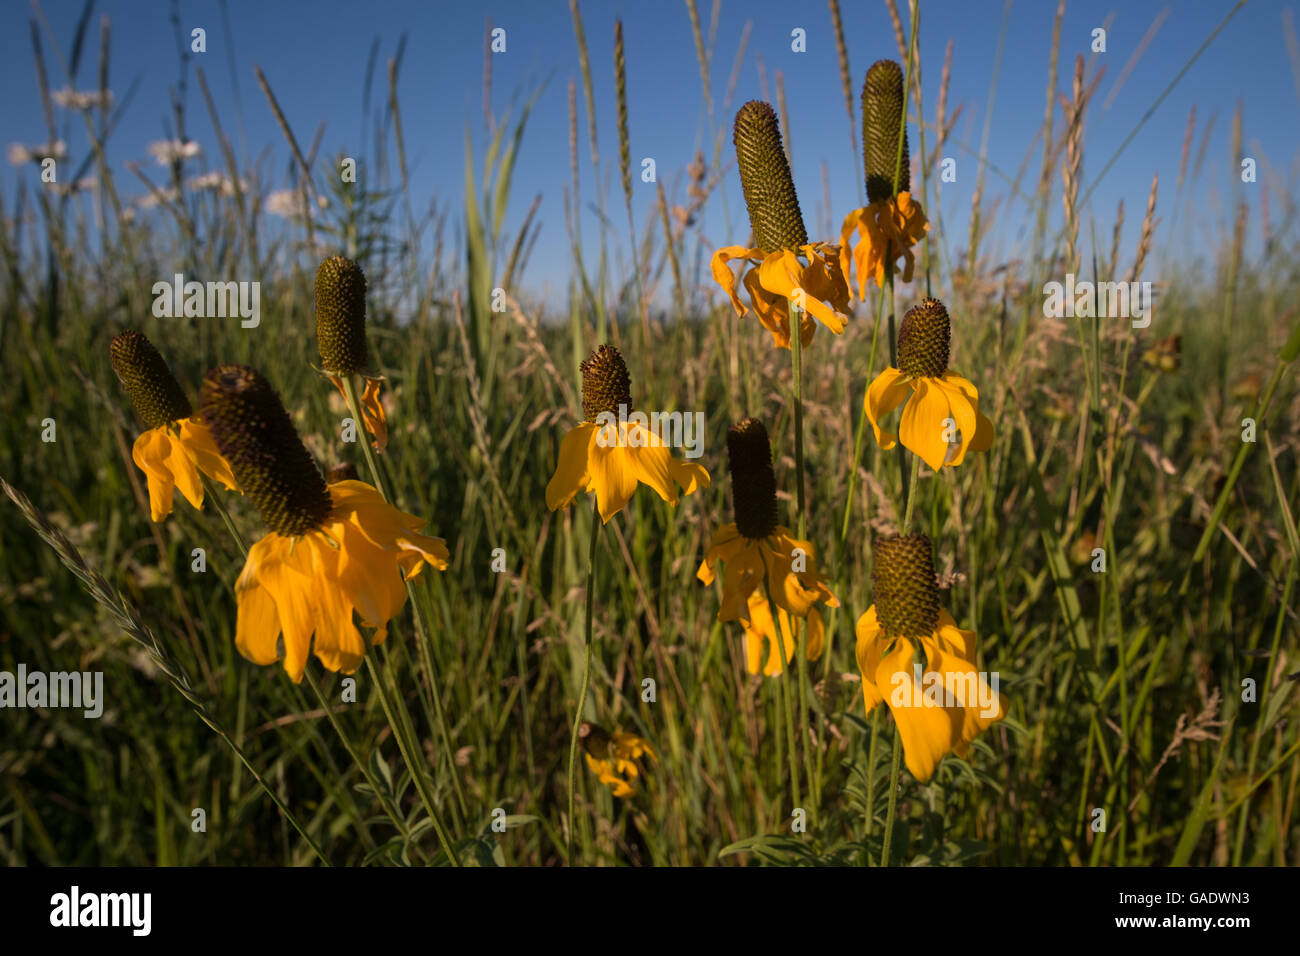 Yellow coneflowers growing in a large field of wild grasses in a wetland restoration area in Montague, Michigan Stock Photo